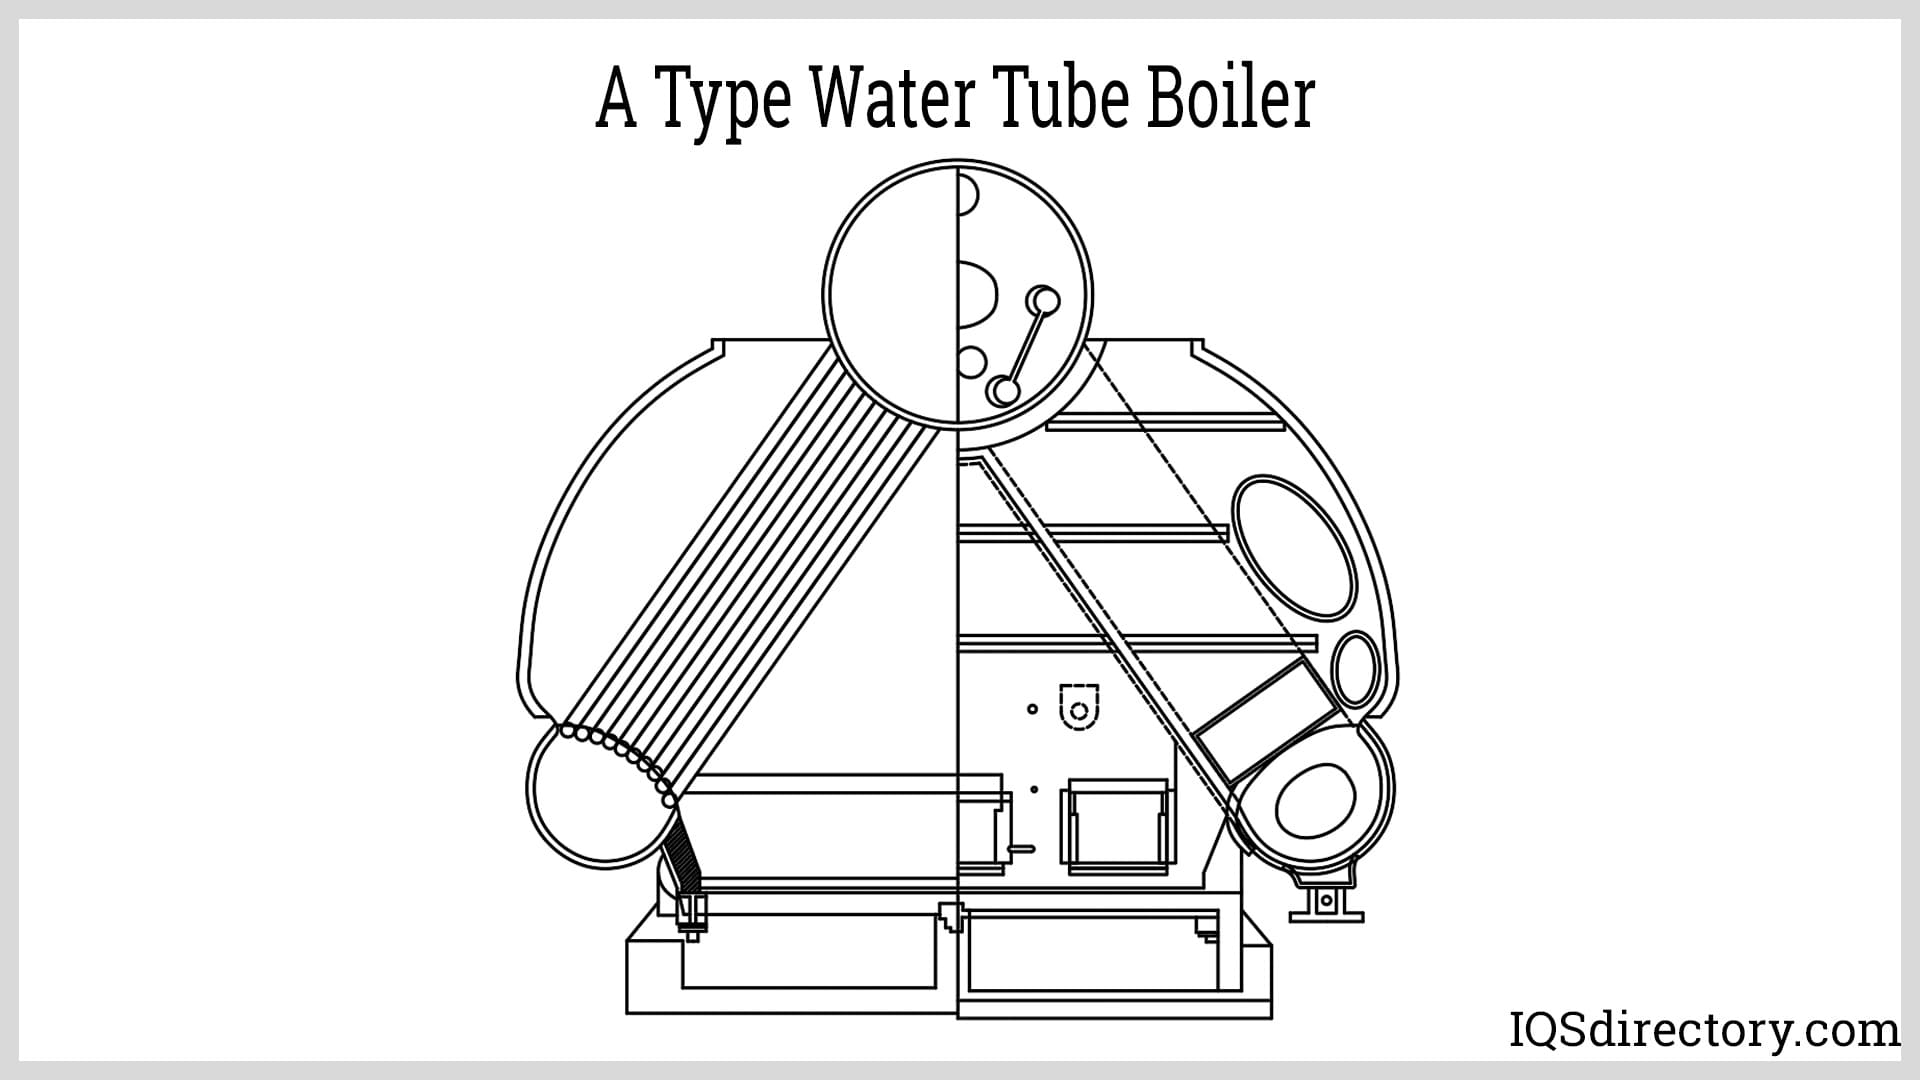 A Type Water Tube Boiler